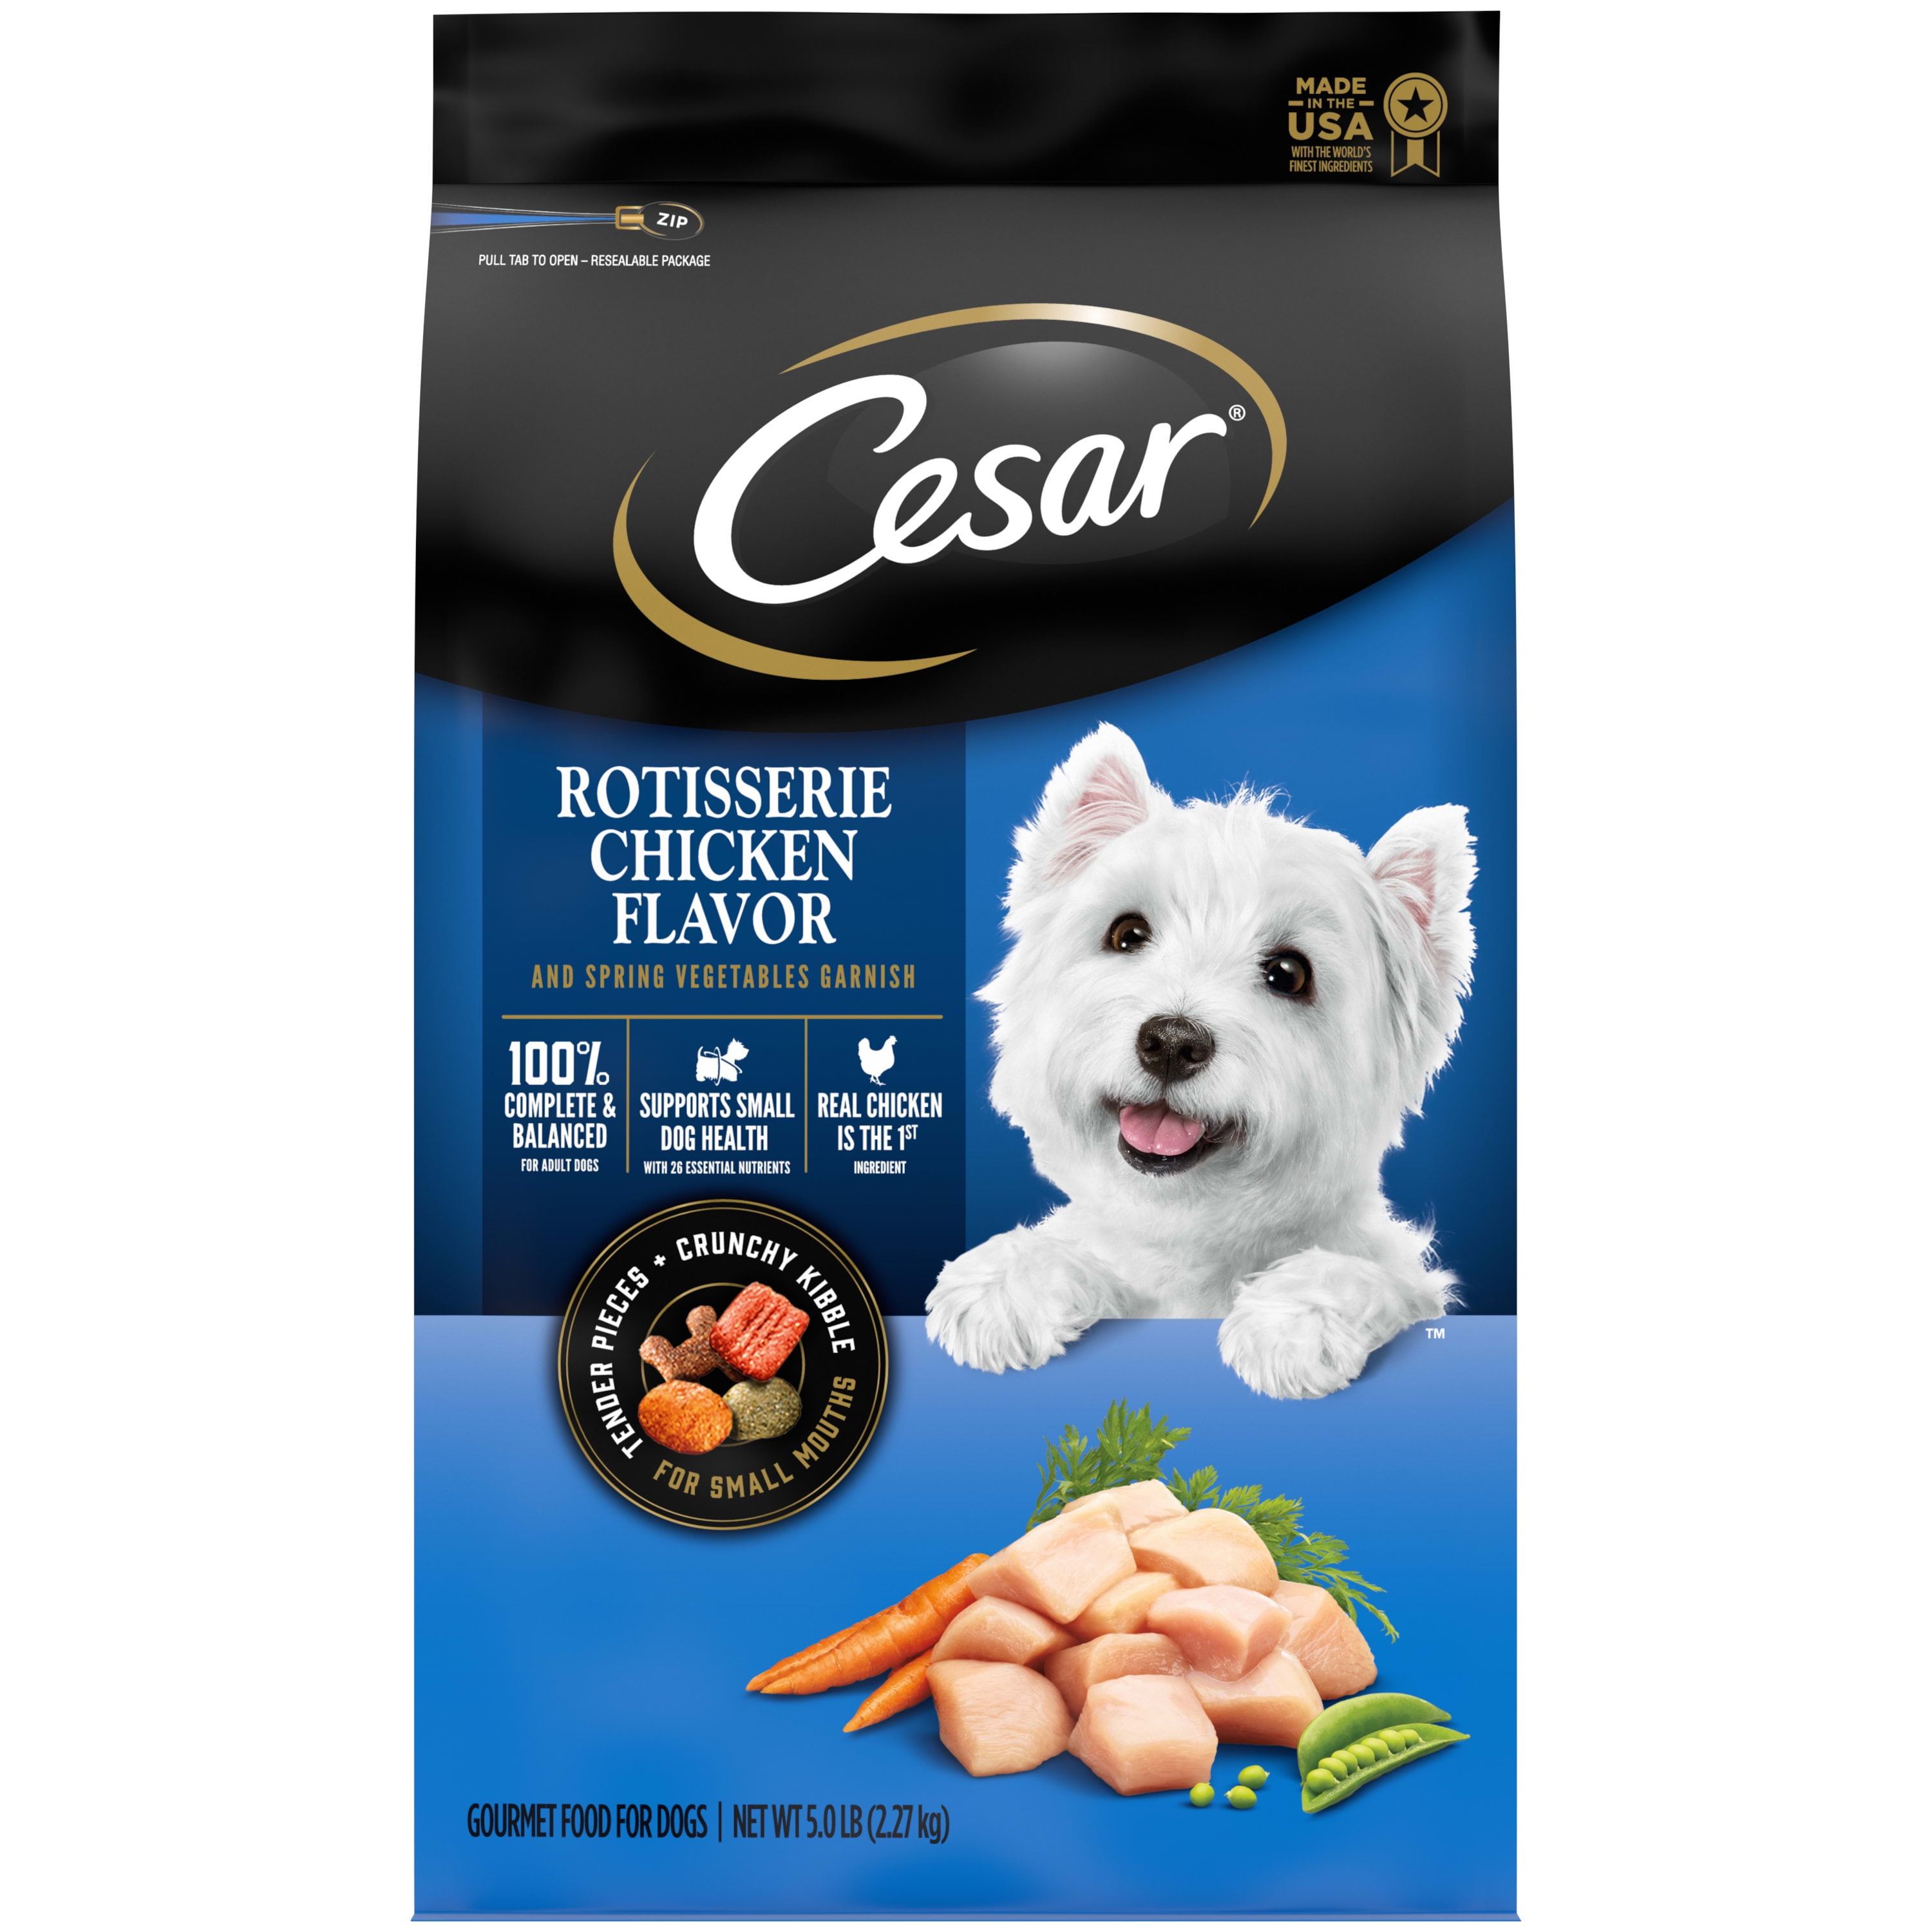 CESAR Rotisserie Chicken with Spring Vegetables Garnish Dry Dog Food for Small Breed Dog, 5 lb Bag